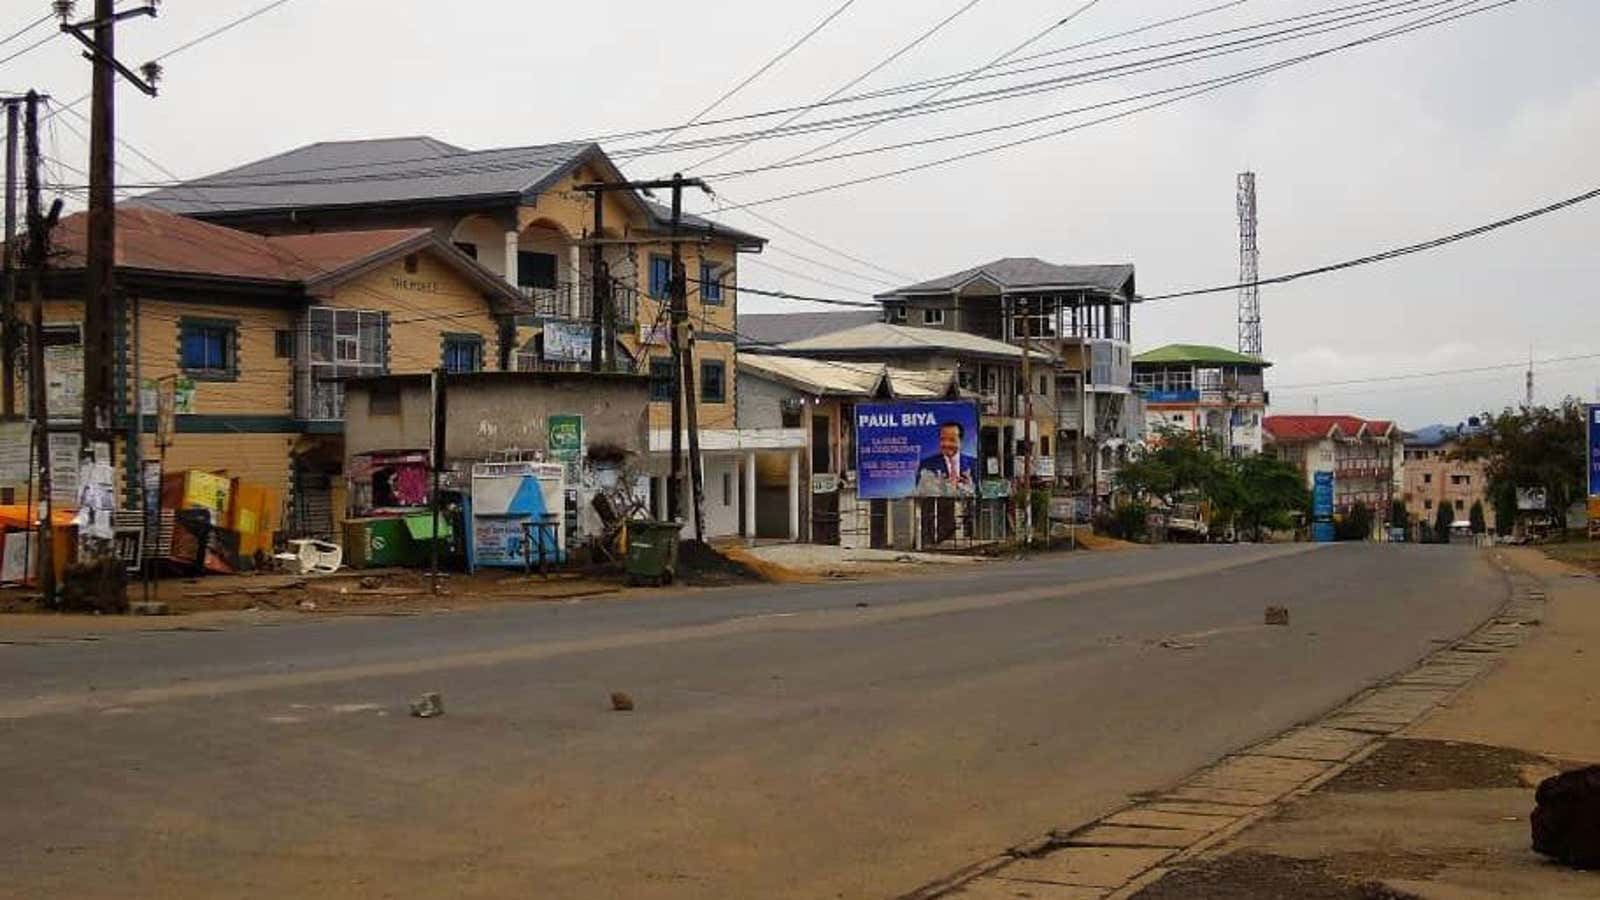 A deserted street in the Buea, Cameroon